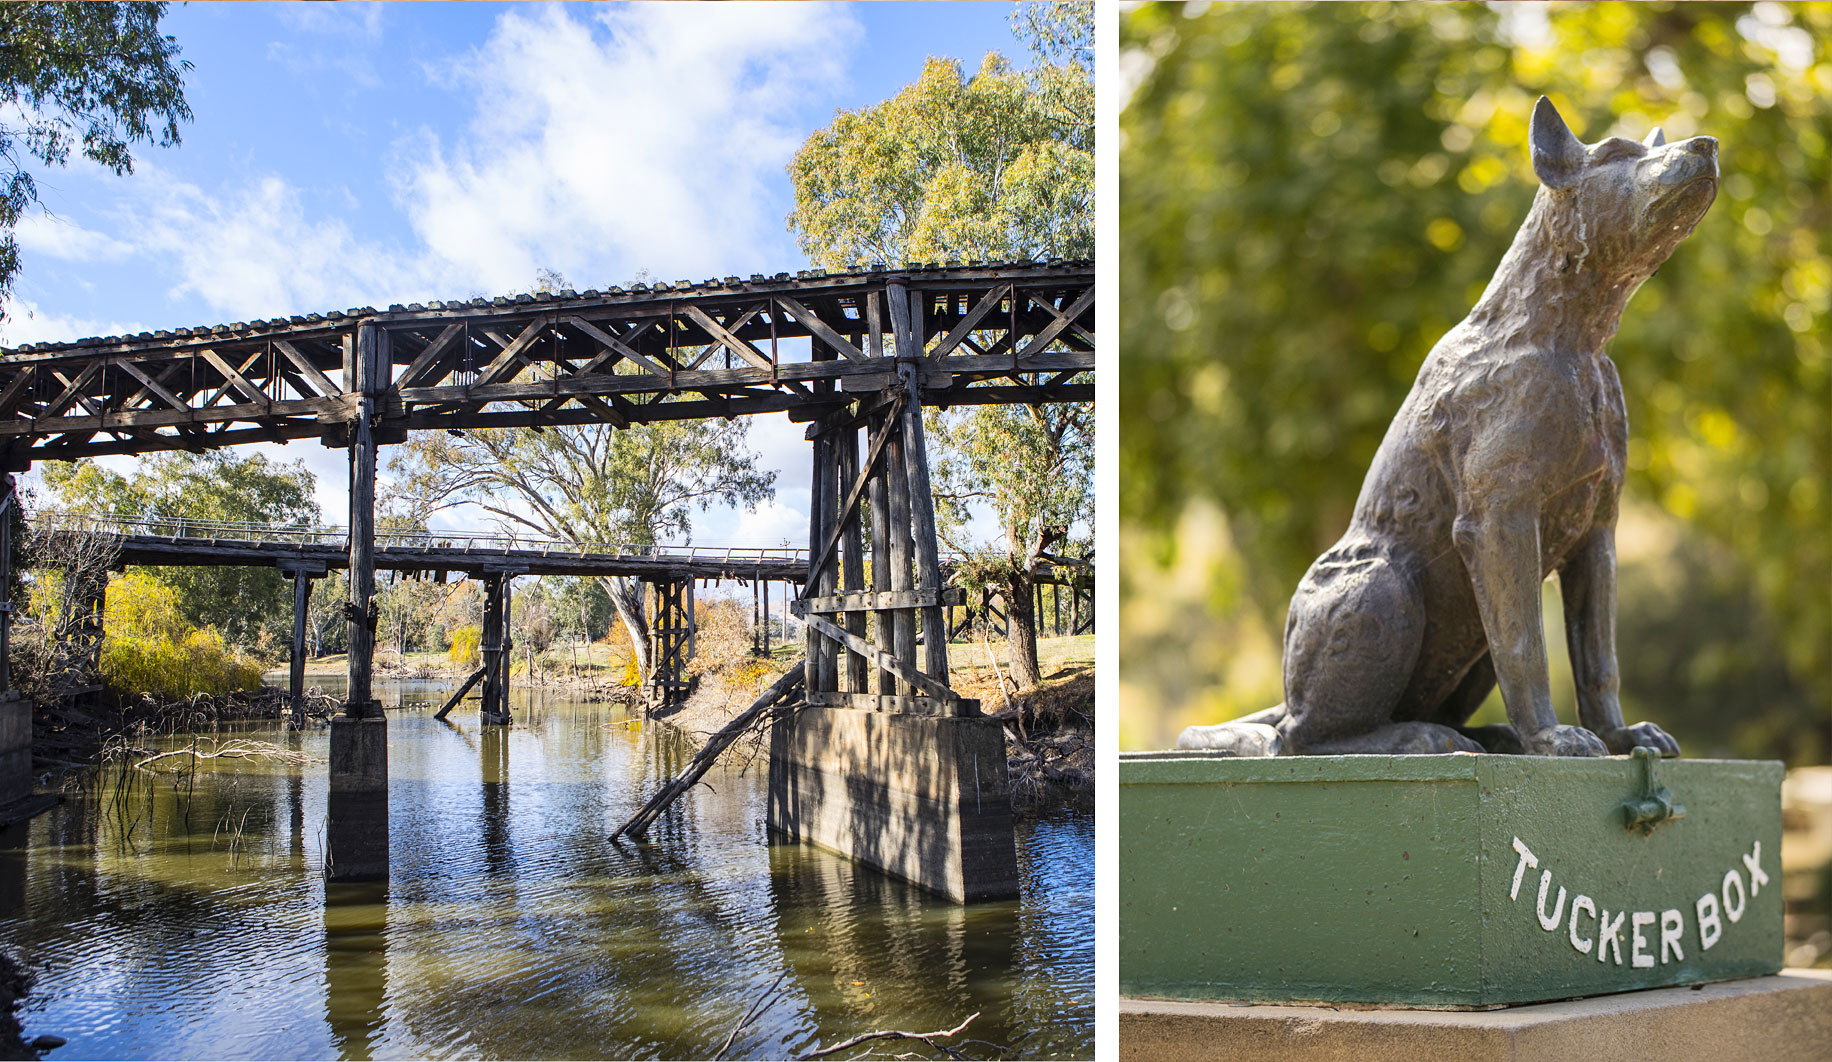 The Railway Bridge and Prince Alfred Bridge Viaduct | The Dog on the Tuckerbox sculptor, by Frank Rusconi